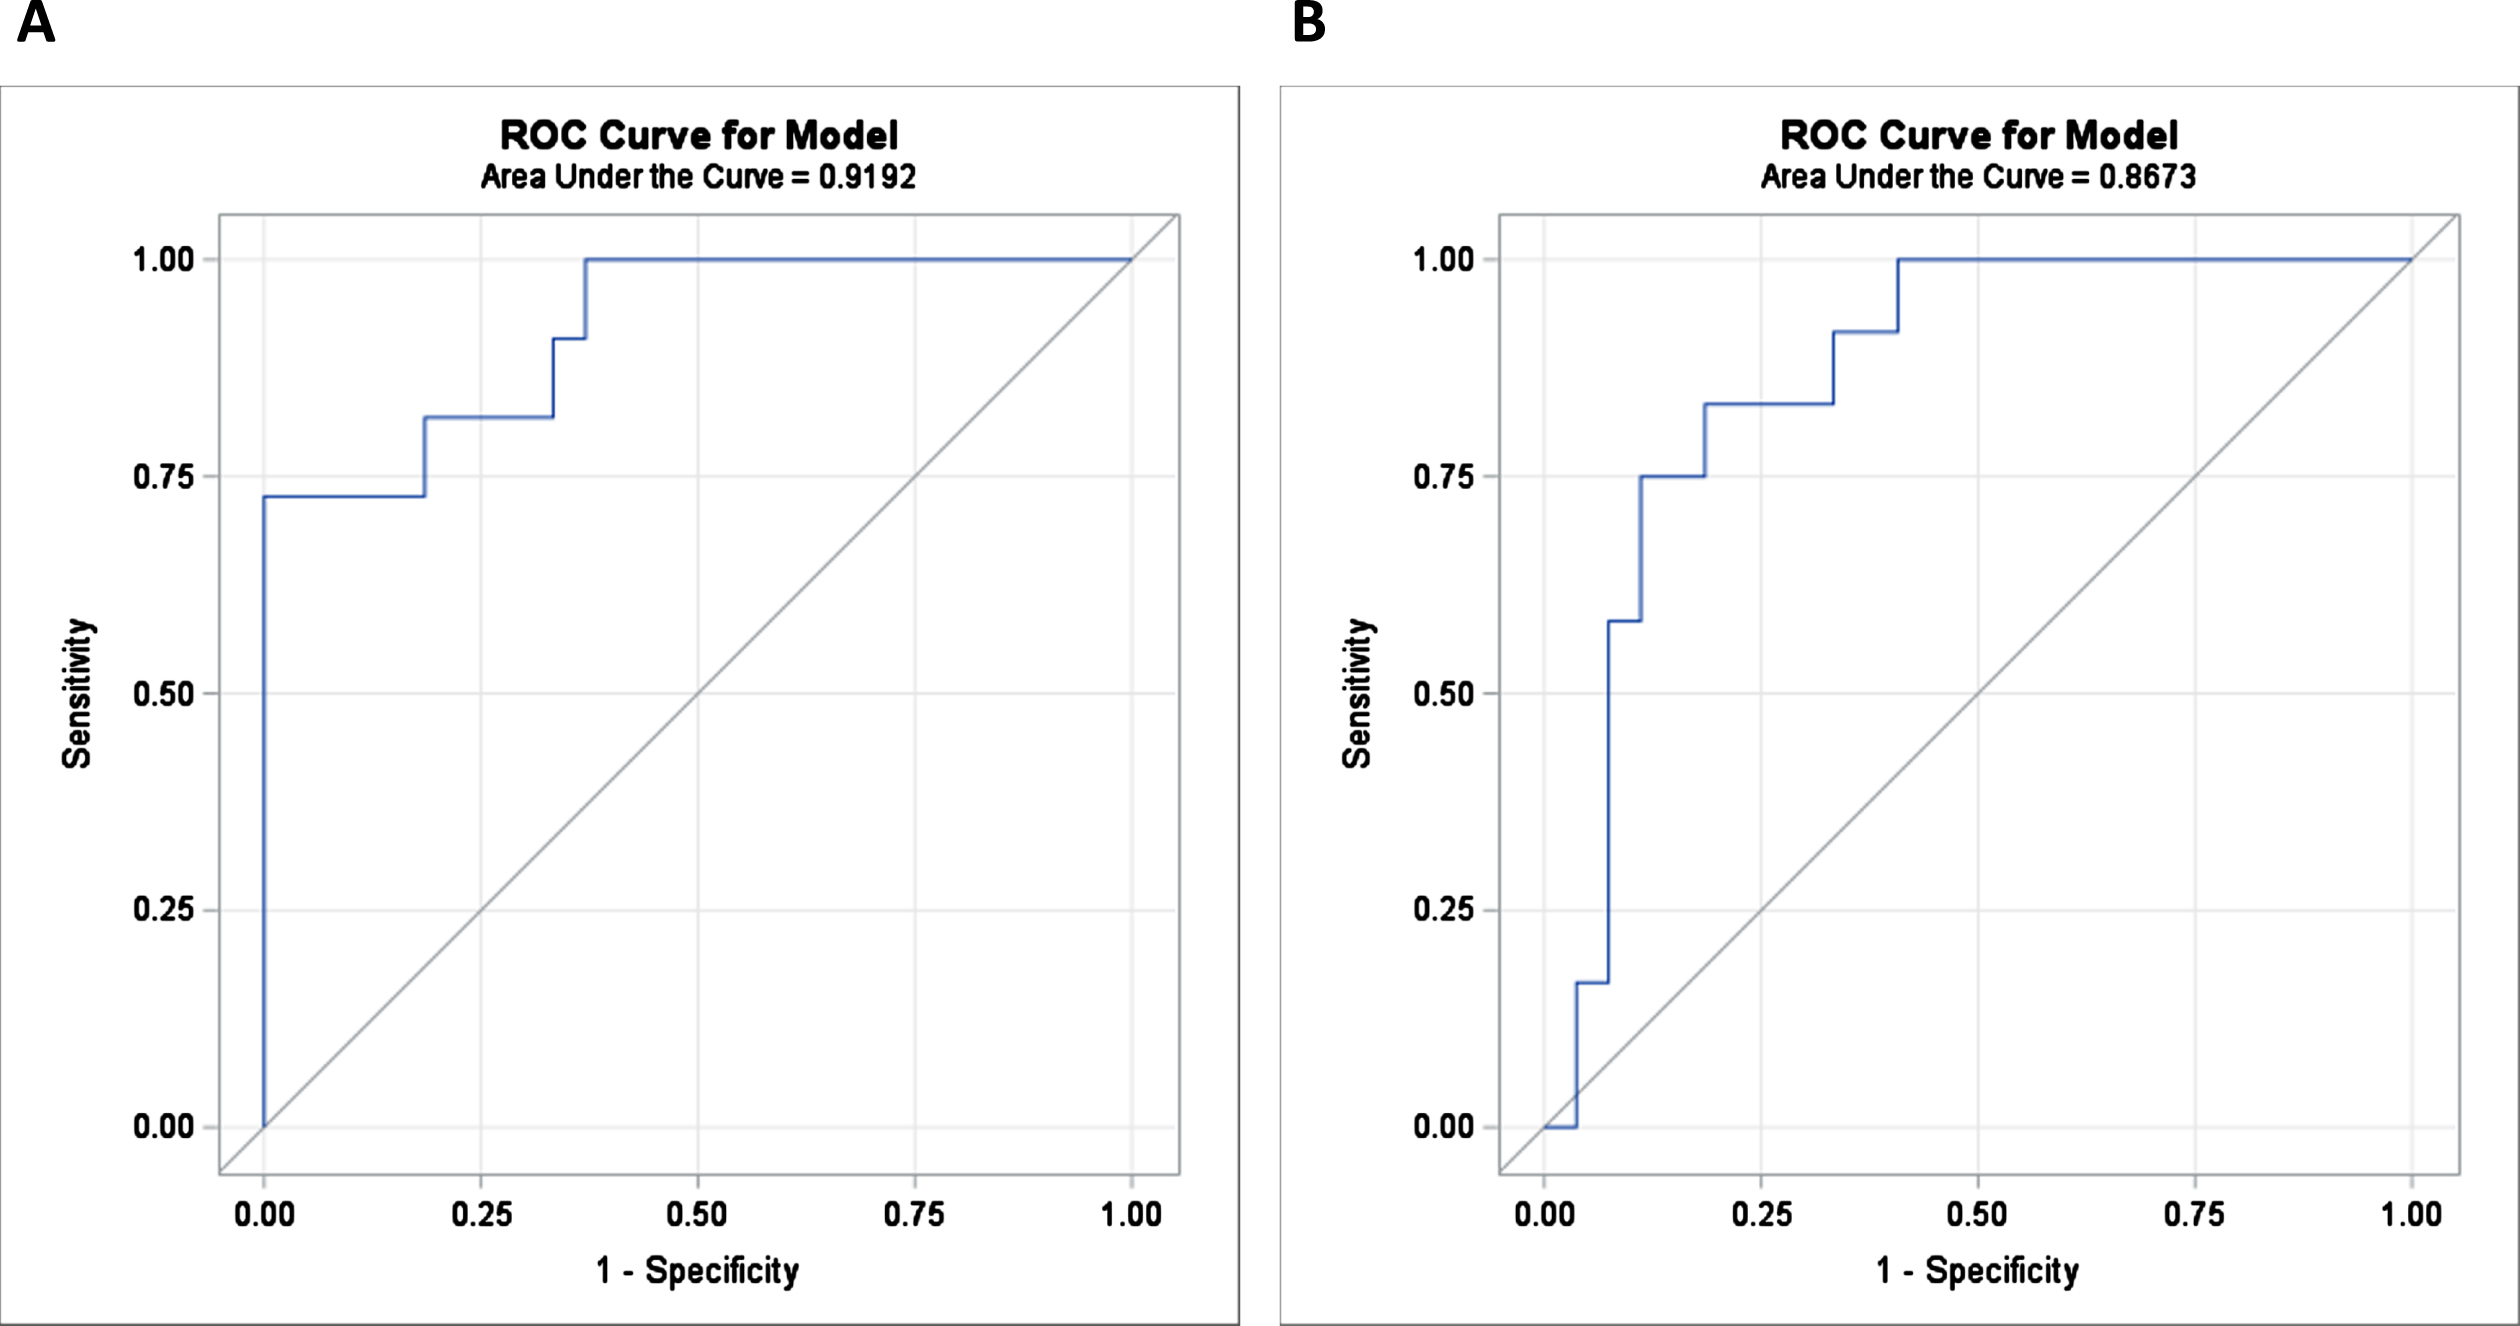 Using ROC analysis, the area under AUC values of the combination of 9 miRs (Model 1) in predicting MCI from cognitively normal subjects. In panel A and B, the ROC curves produced an AUC value of 0.92 (p < 0.0001) and 0.87 (p < 0.0001) corresponding to Experiment 1 and Experiment 2, respectively.